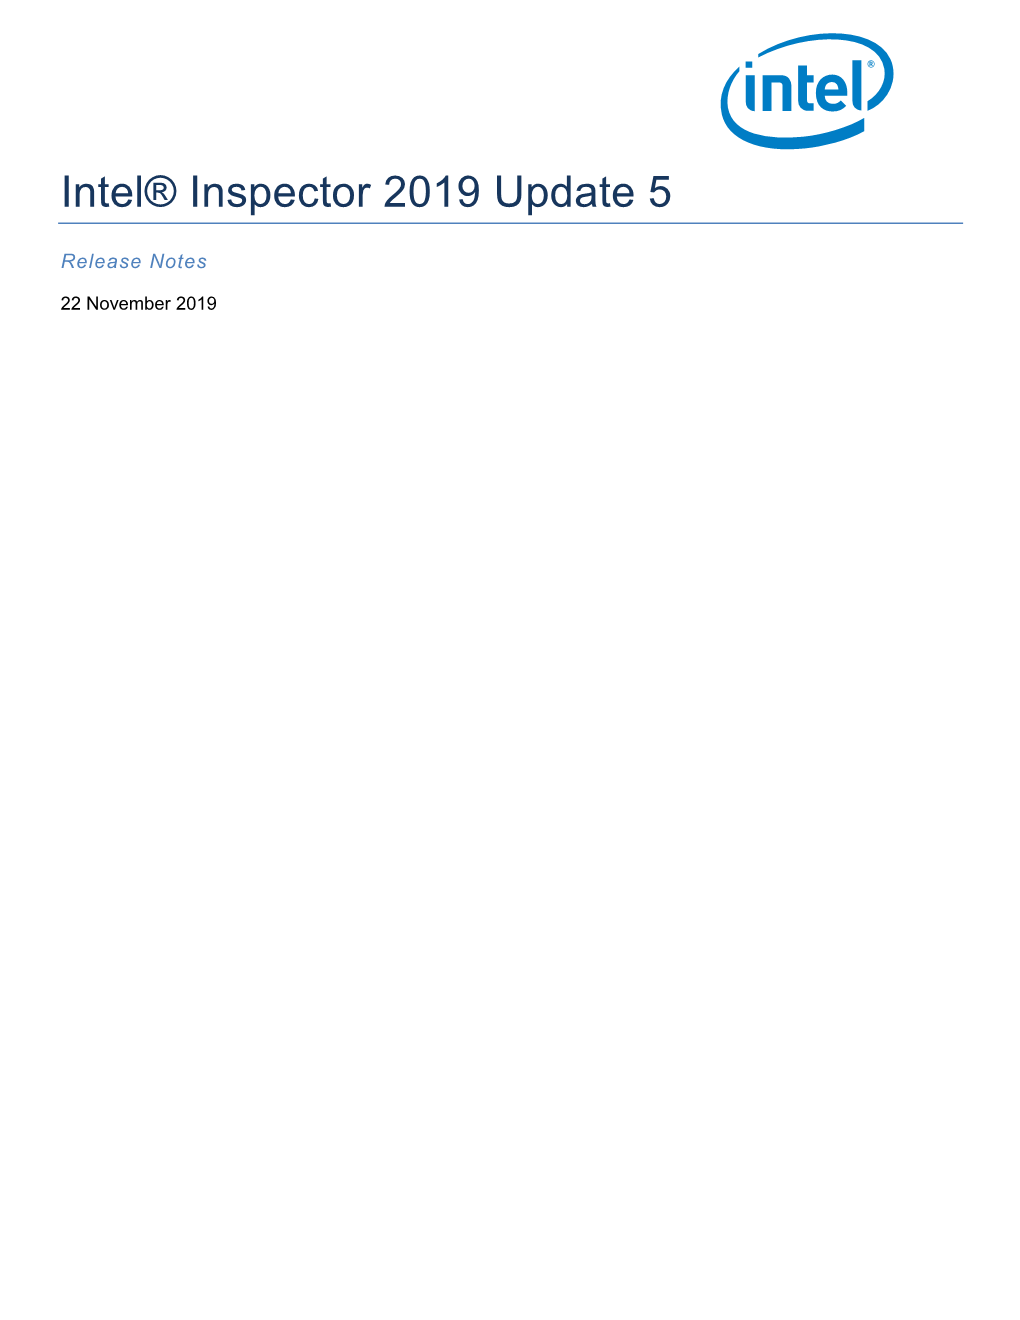 Intel® Inspector 2019 Update 5 Release Notes Intel® Inspector 2019 Update 5 to Learn More About This Product, See